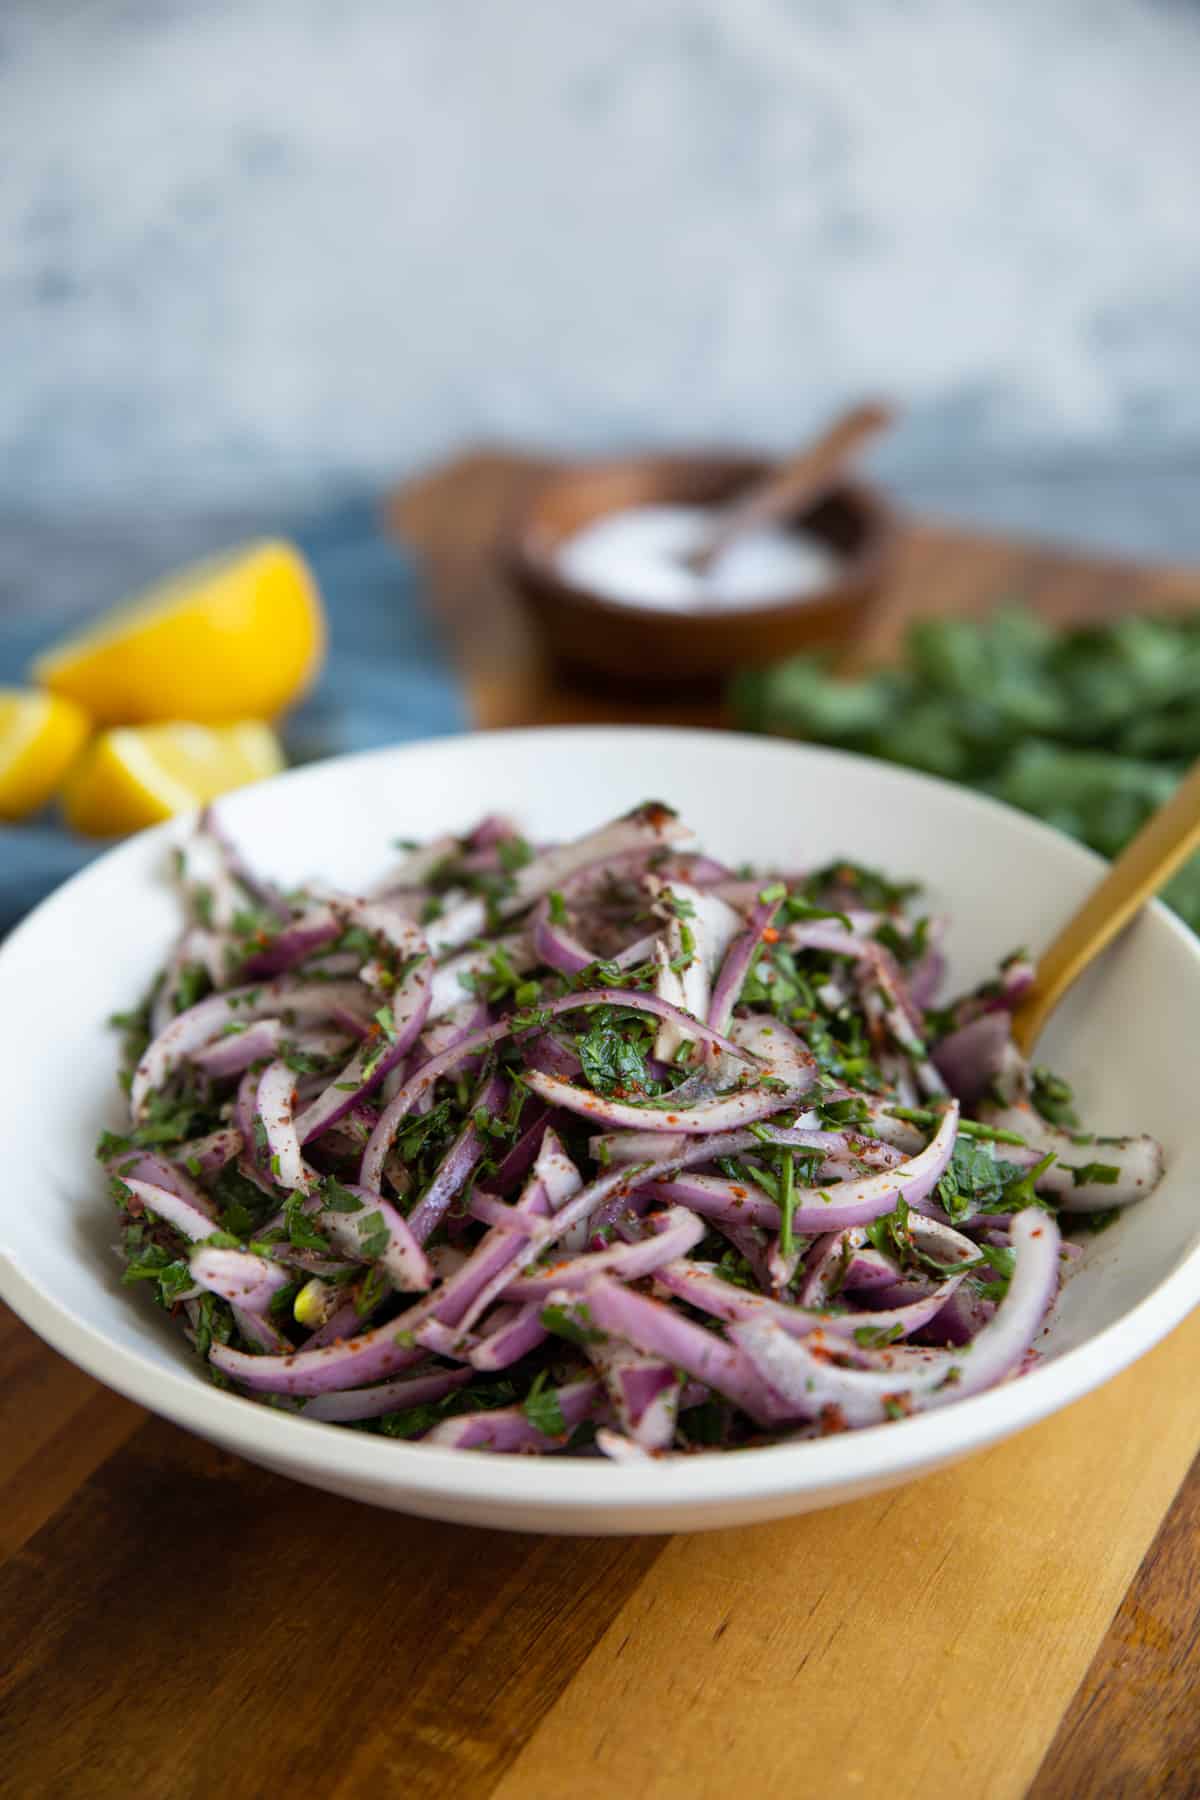 Turkish sumac onions are ready in 10 minutes and make an ideal side dish to a wide variety of dishes. Crispy red onions are marinated with lemon juice, sumac and herbs - all you need to add a lot of bright flavors to any dish!
